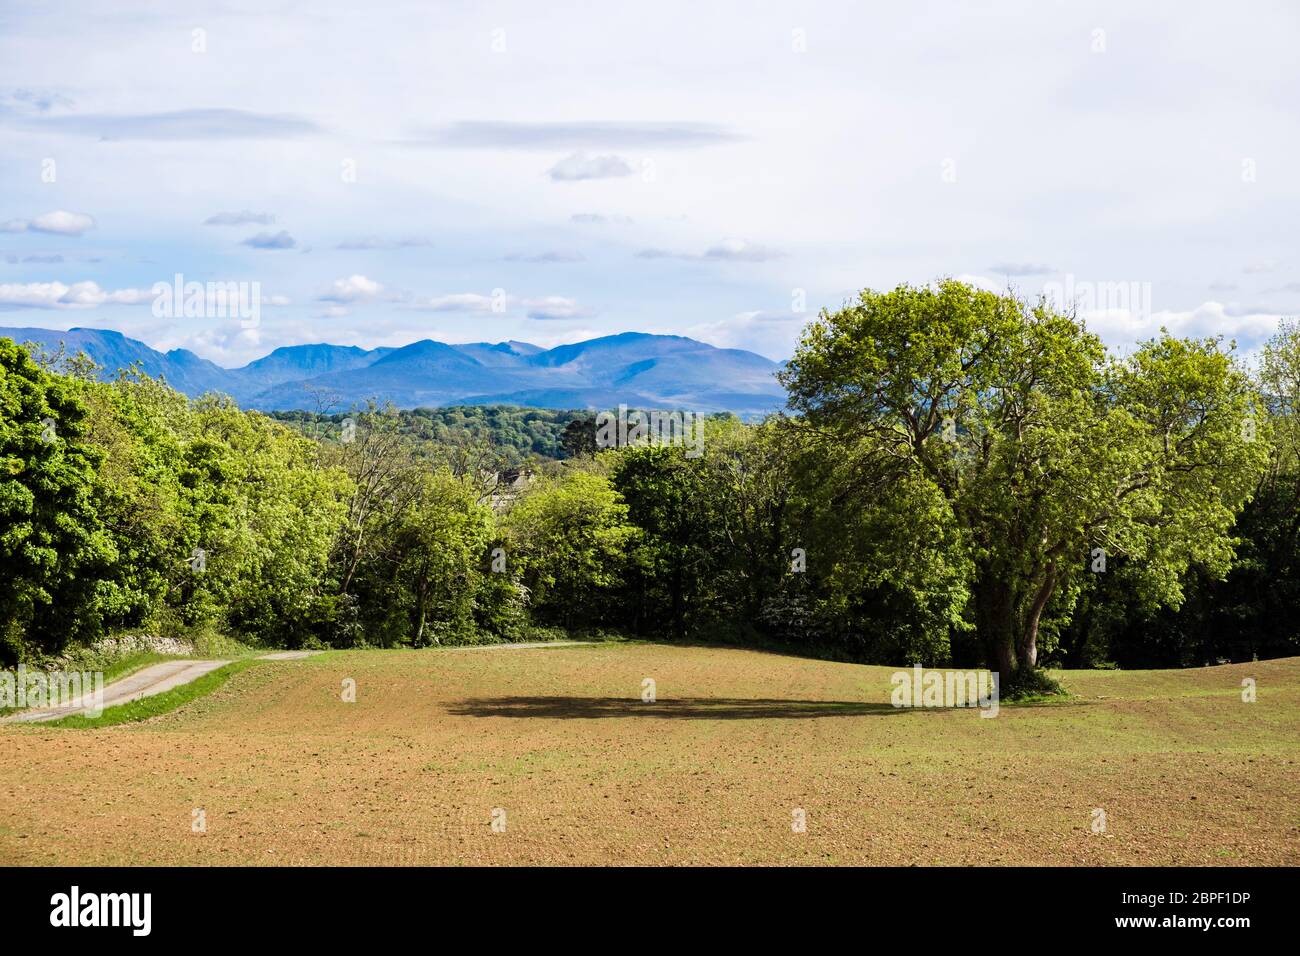 Countryside with a view across a tilled field to distant mountains in Snowdonia from Y Glyn, Benllech, Isle of Anglesey, Wales, UK, Britain Stock Photo